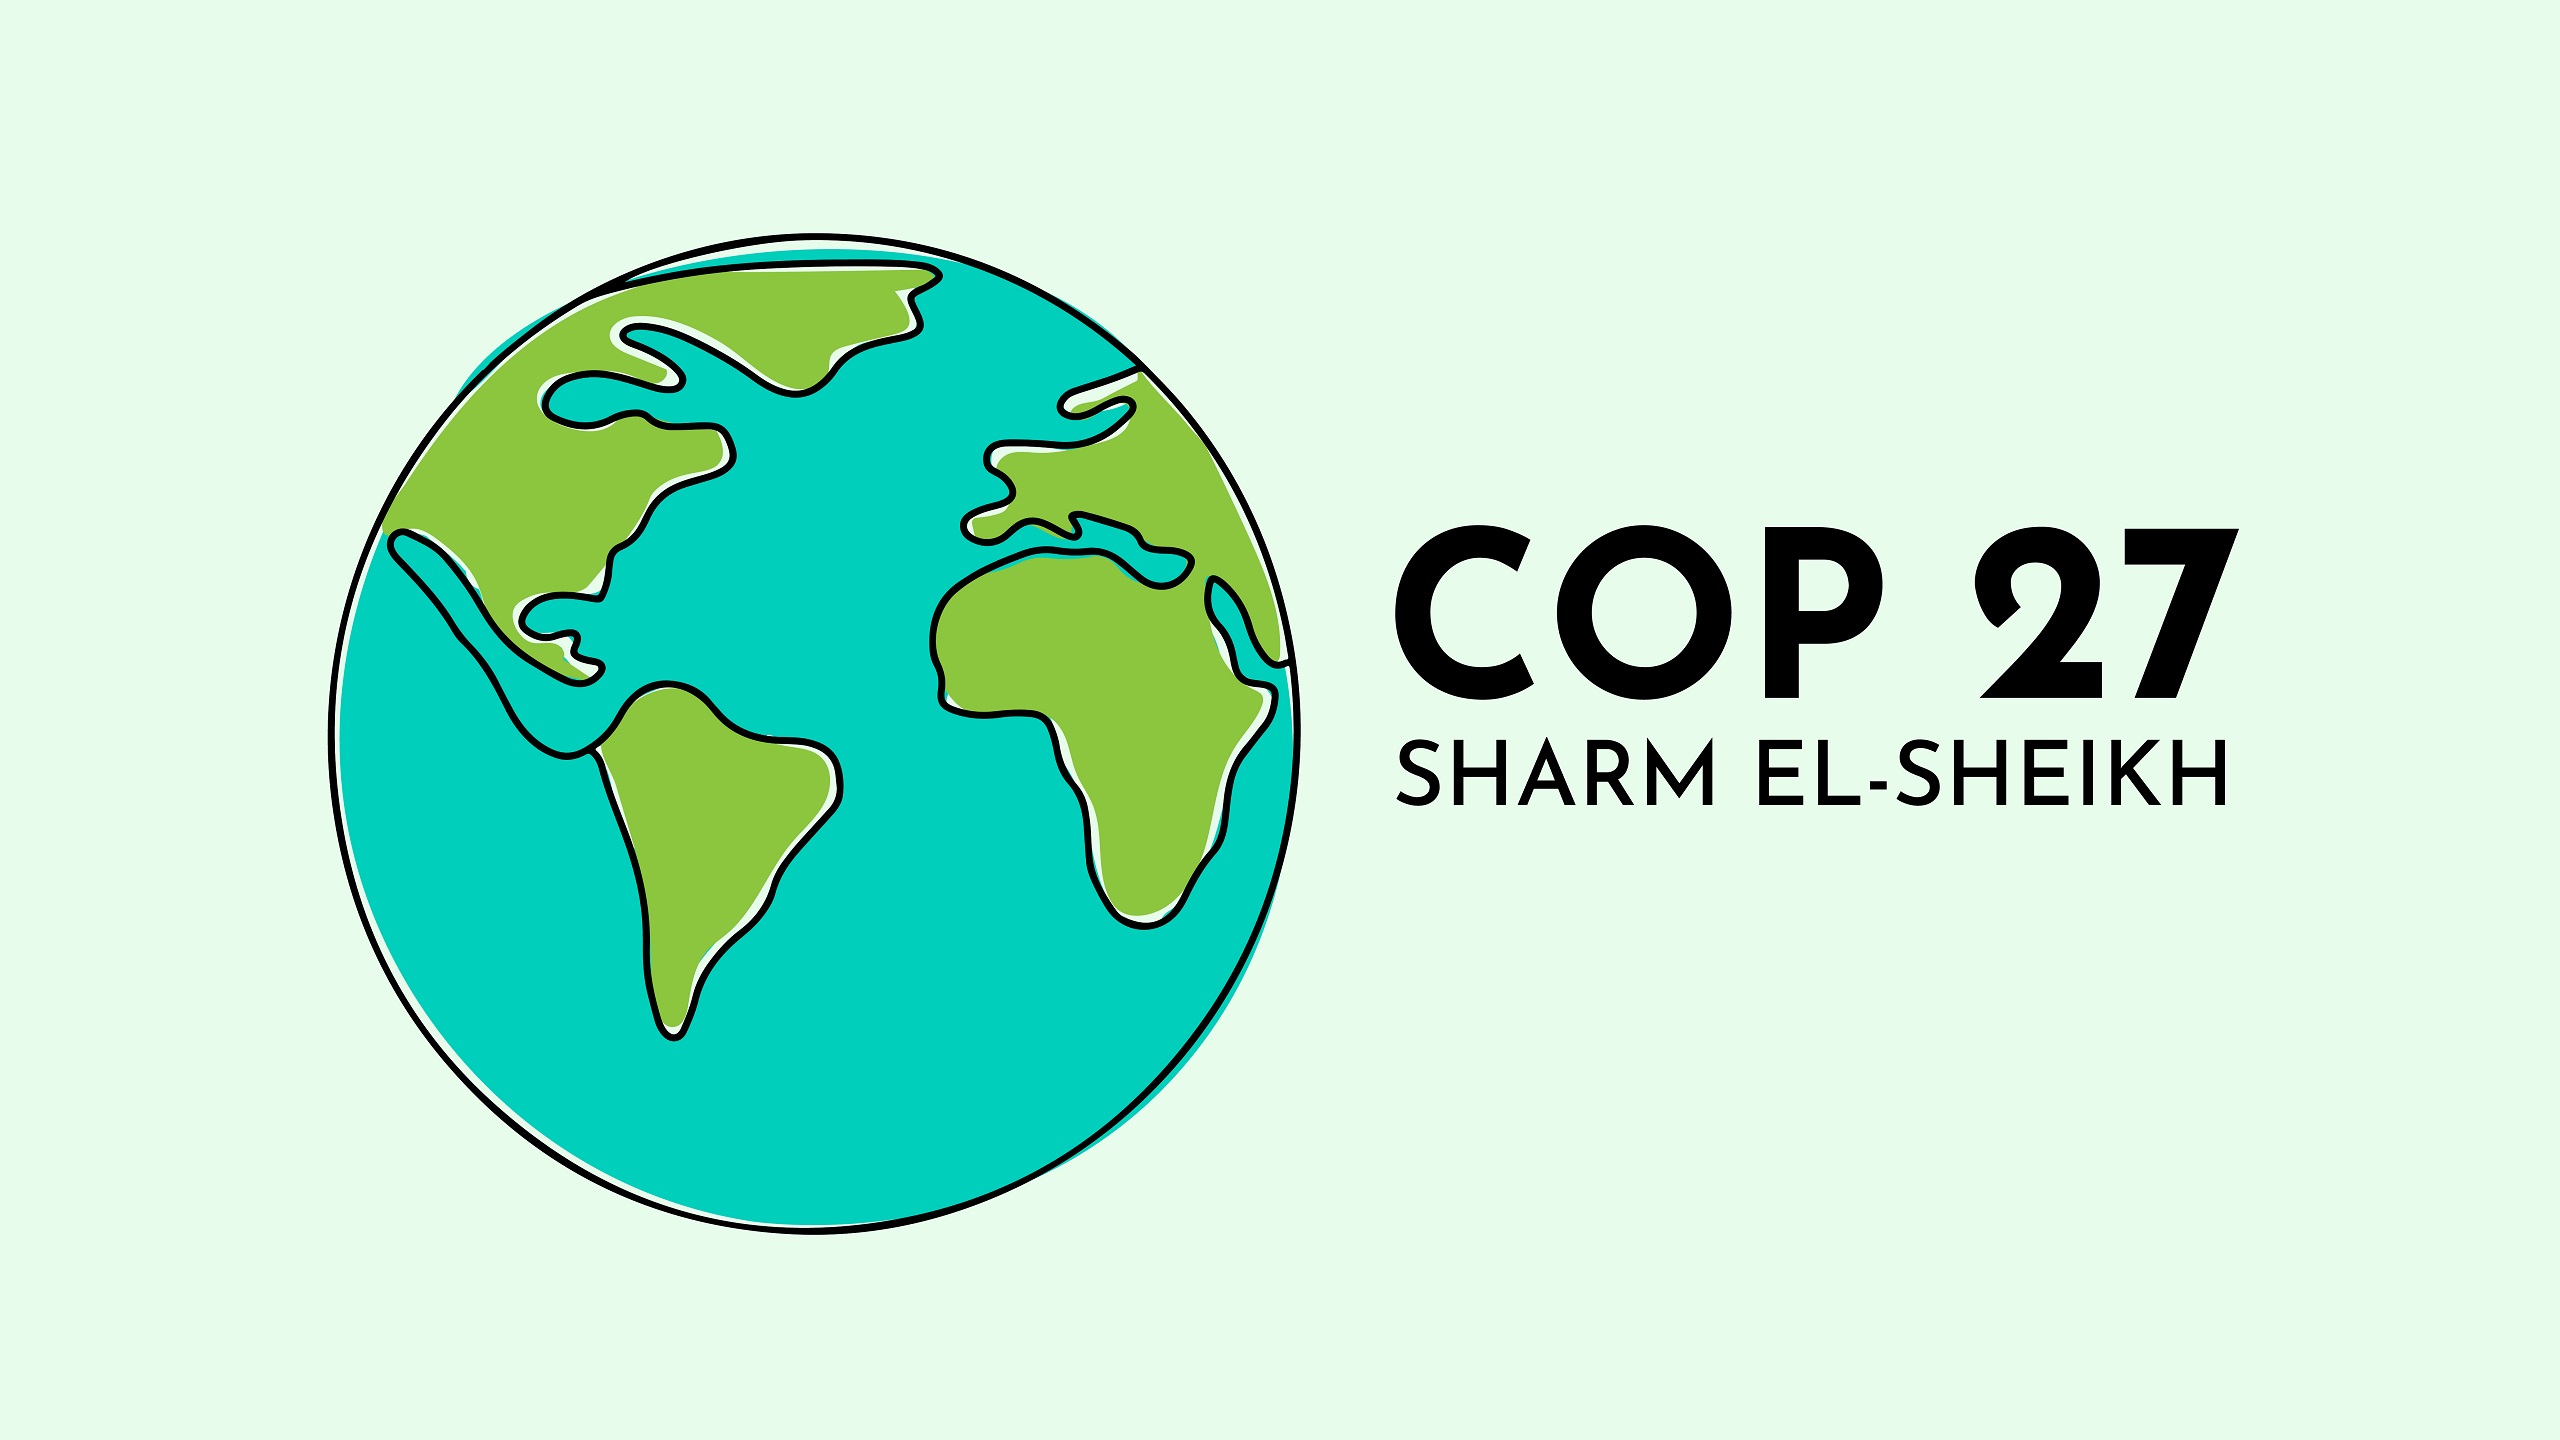 UN Climate Change Conference Opens in Sharm el-Sheikh